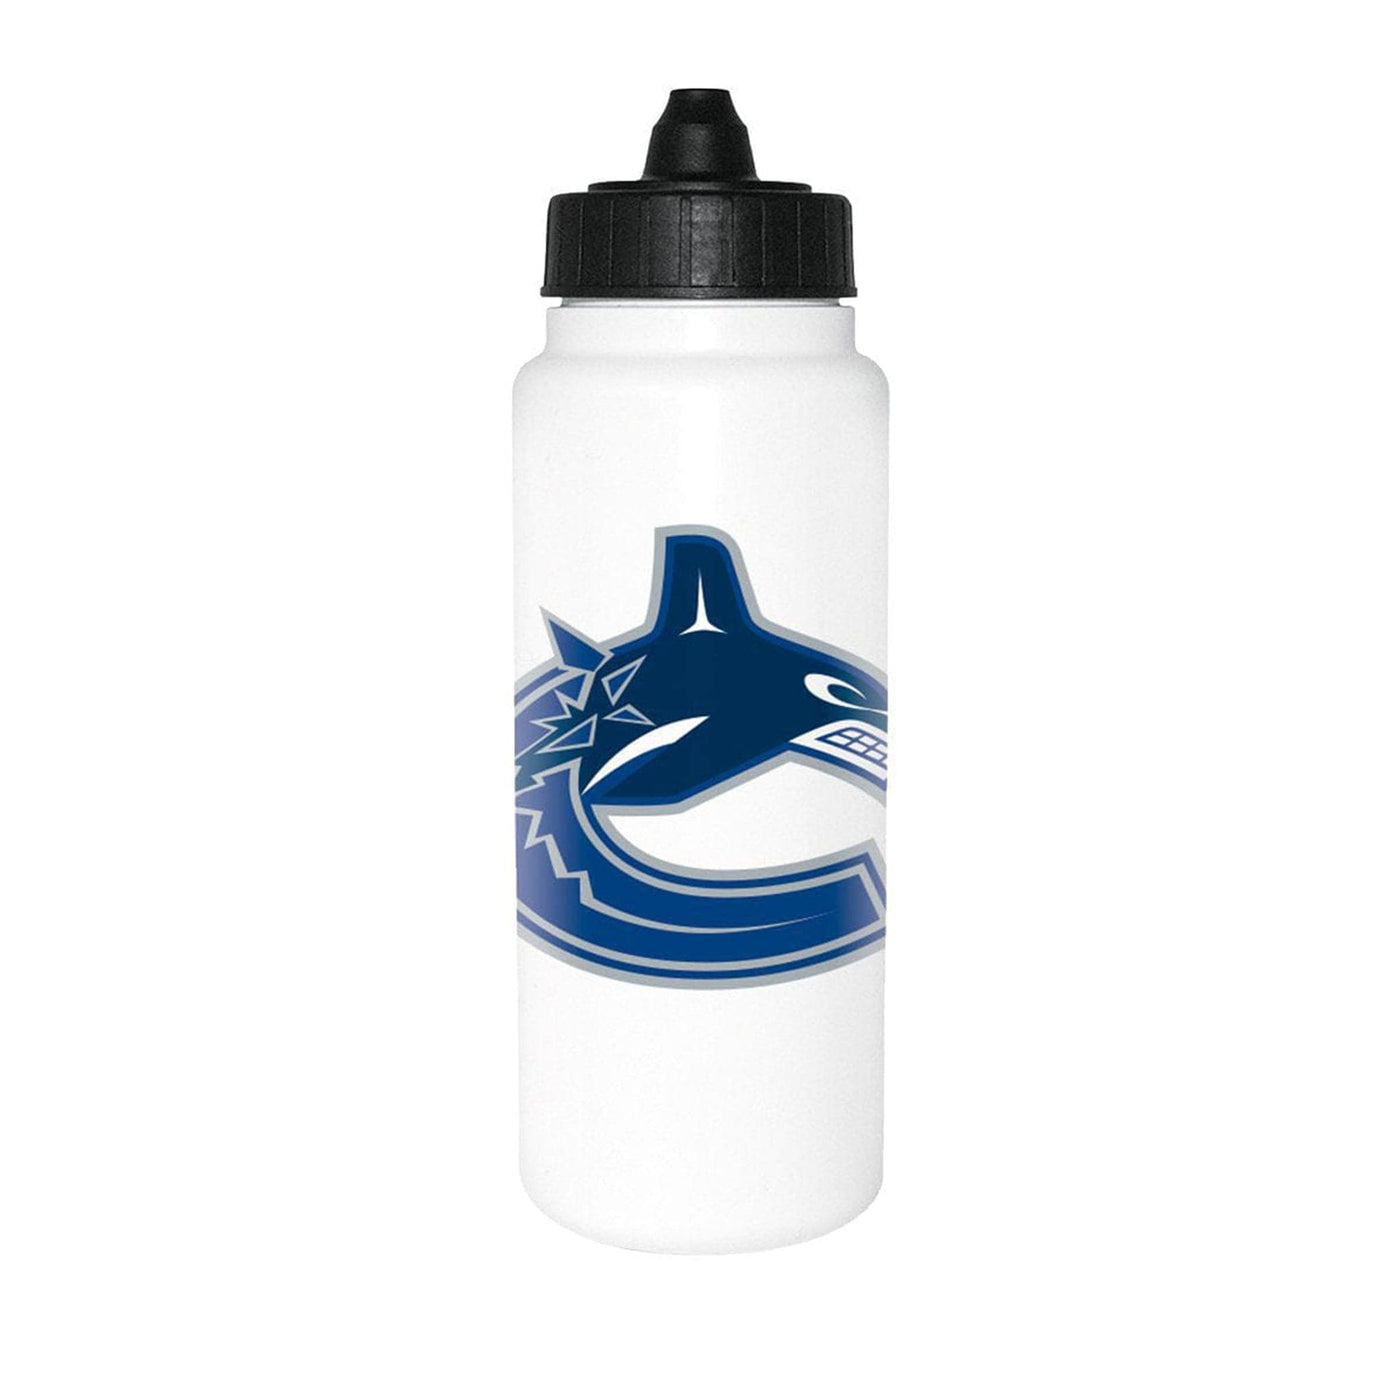 Vancouver Canucks Inglasco NHL Tall Water Bottle - The Hockey Shop Source For Sports